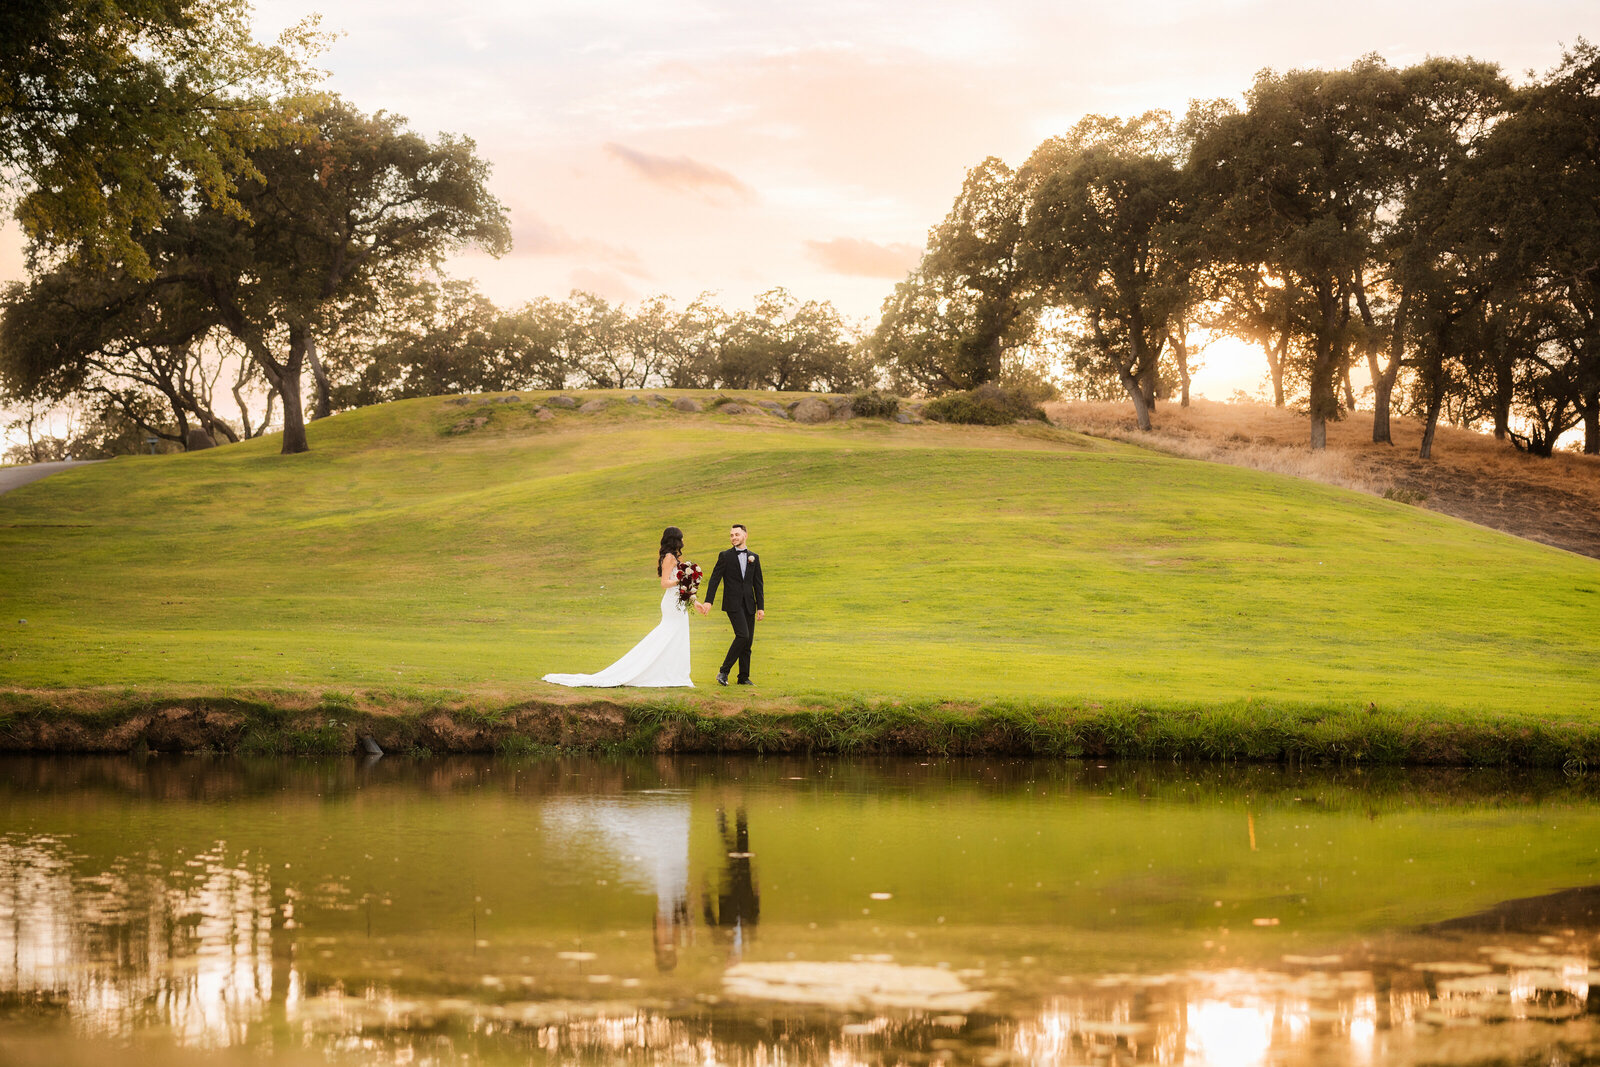 bride and groom walk in front of a pond after wedding ceremony. Groom looks back at bride as she follows him. Photo by Sacramento wedding photographer, Philippe Studio Pro.